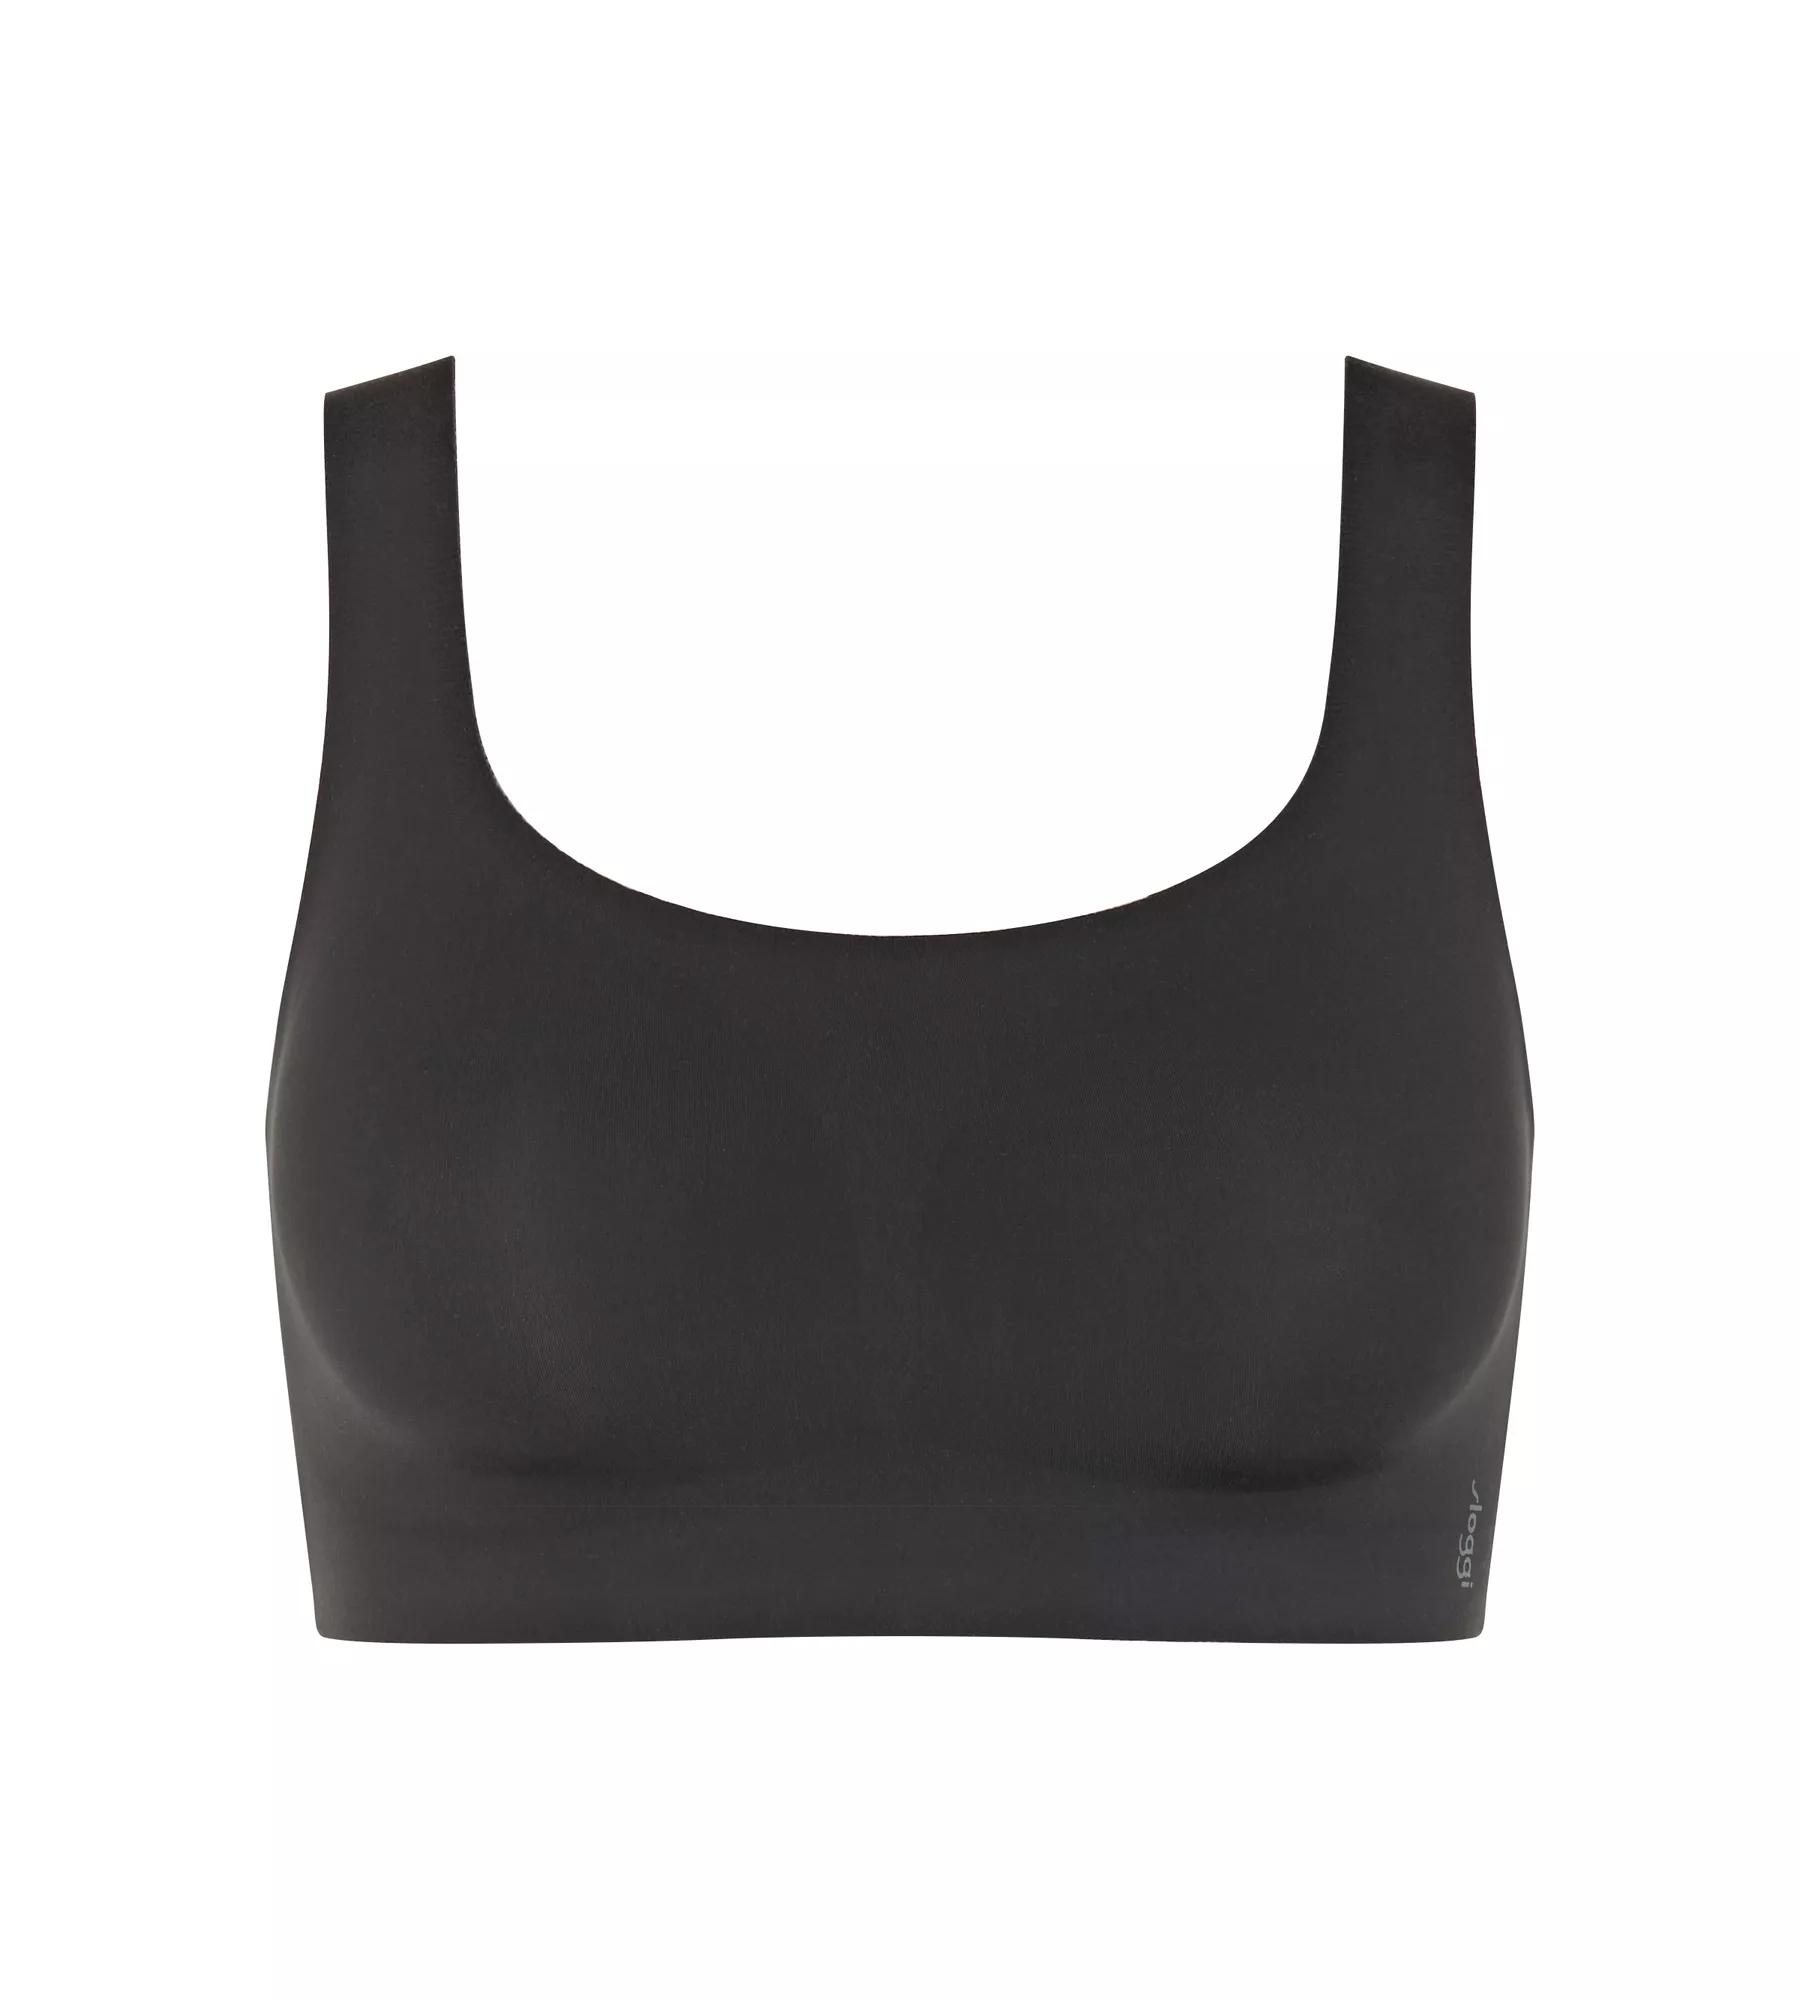 BOOLAVARD� Set of 3 Comfort and Sports Bra: Form Bustier Top Without Wires,  Seam